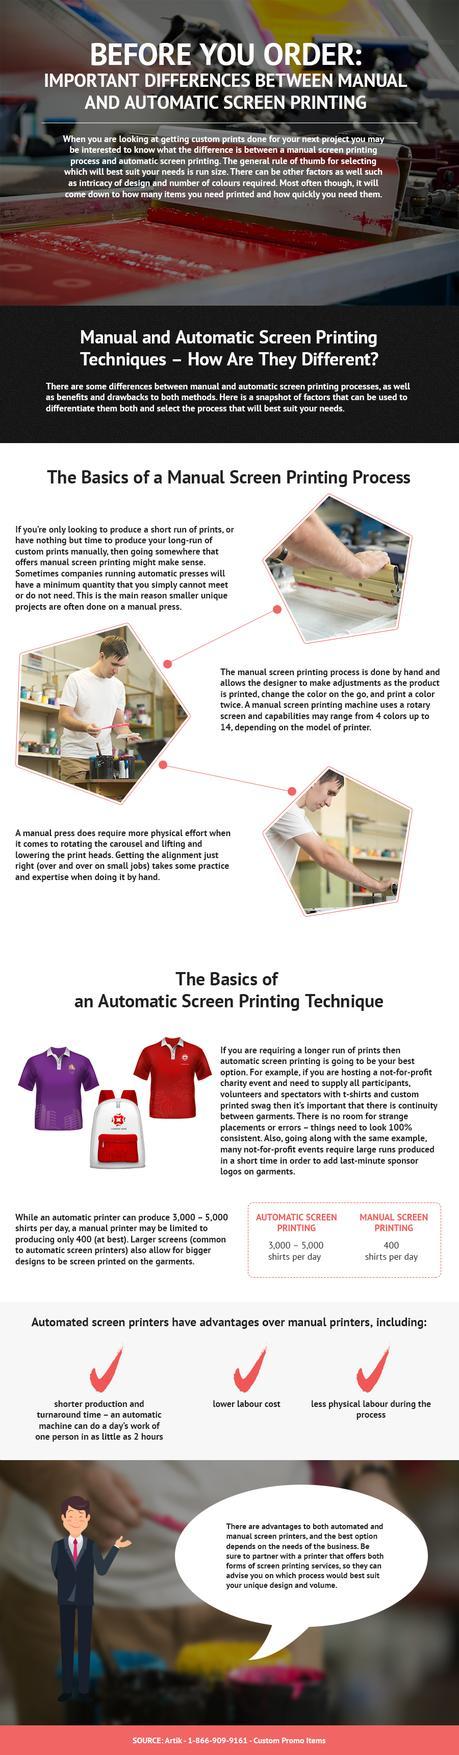 Differences Between Manual & Automatic Screen Printing